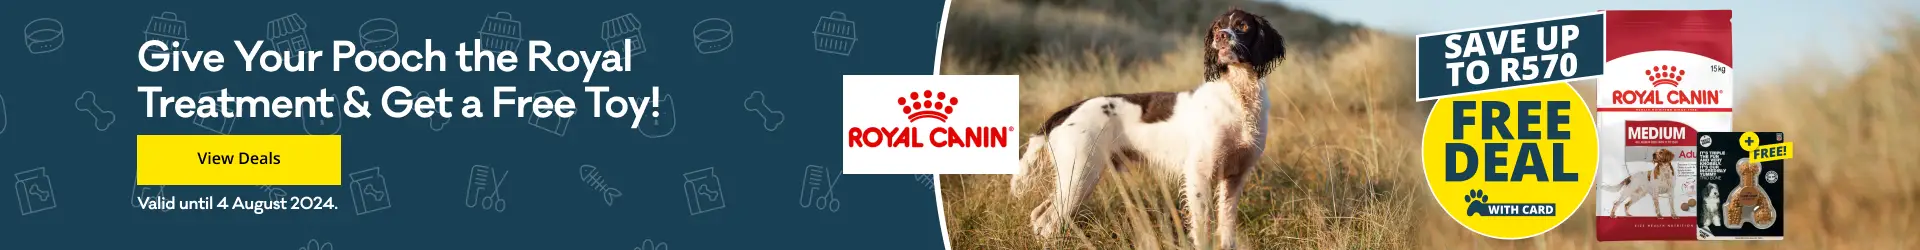 Give your pooch the royal treatment and get a free toy with Royal Canin Dry Dog Food at Petshop Science. Click to view deals.